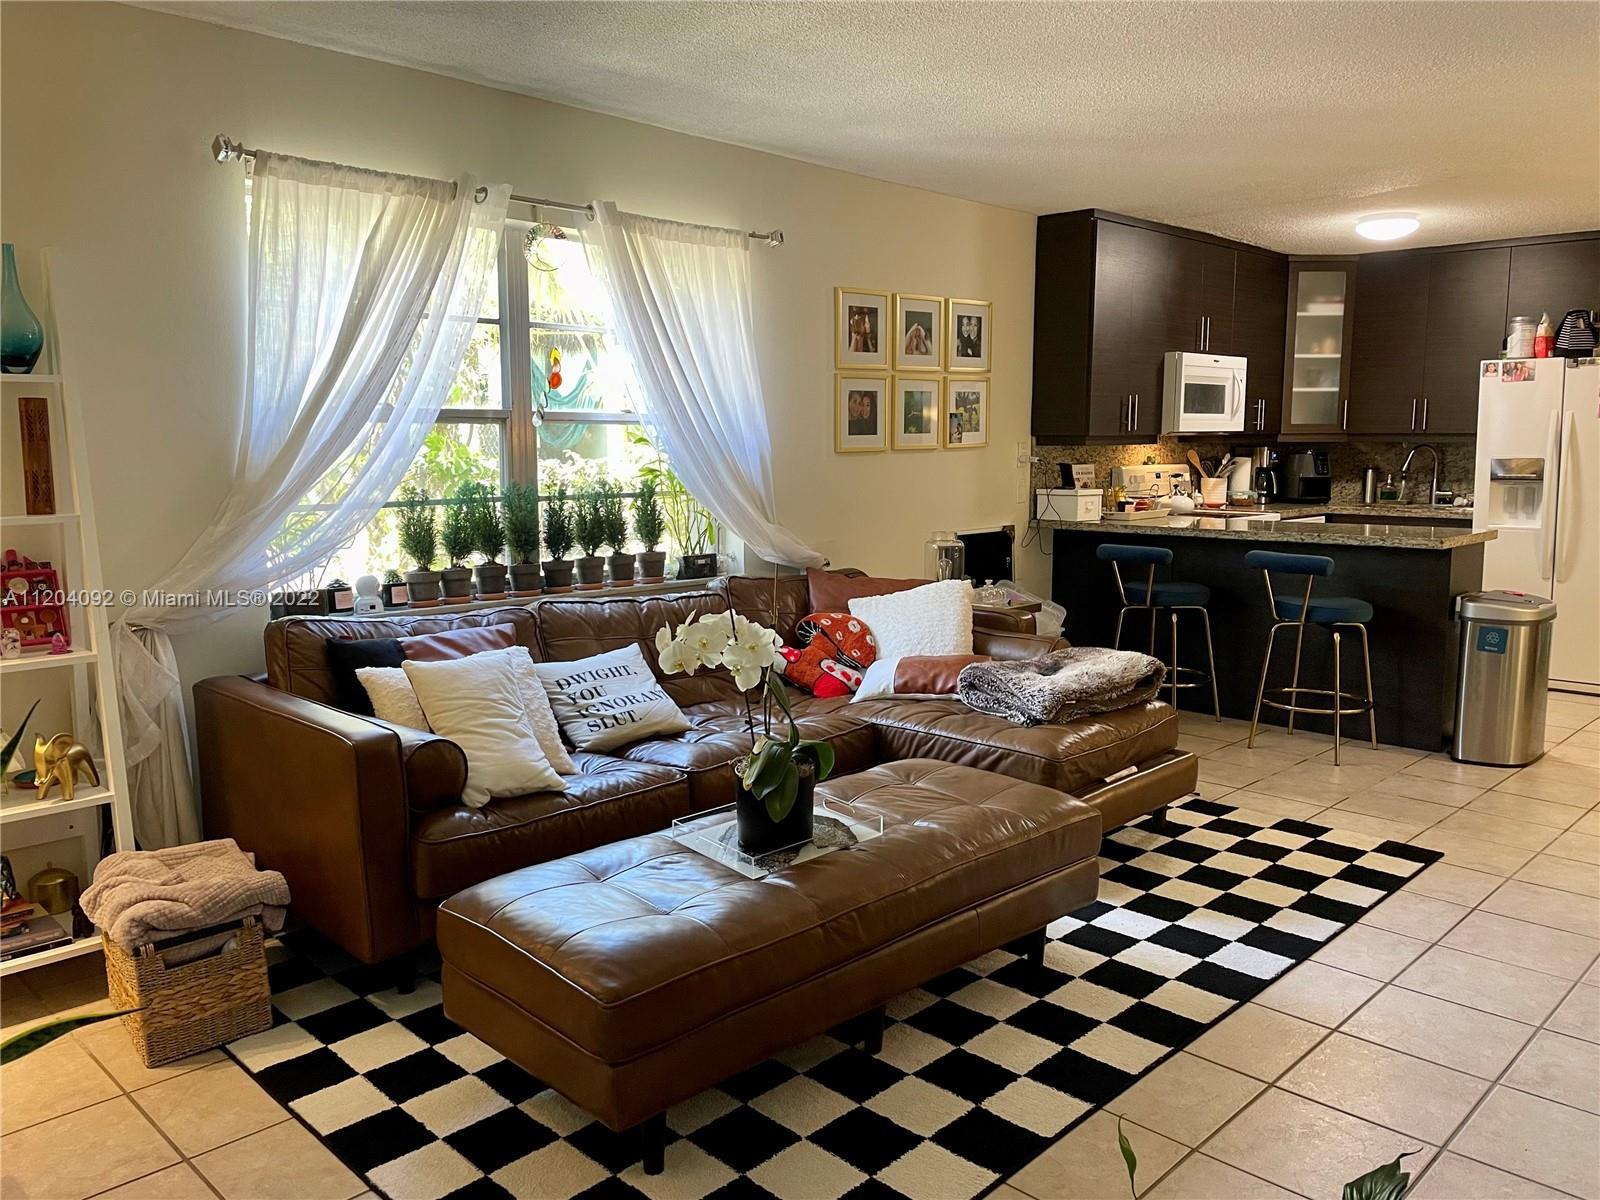 Charming and cozy 1 bedroom apt in boutique building in the heart of Miami Beach, just minutes from 